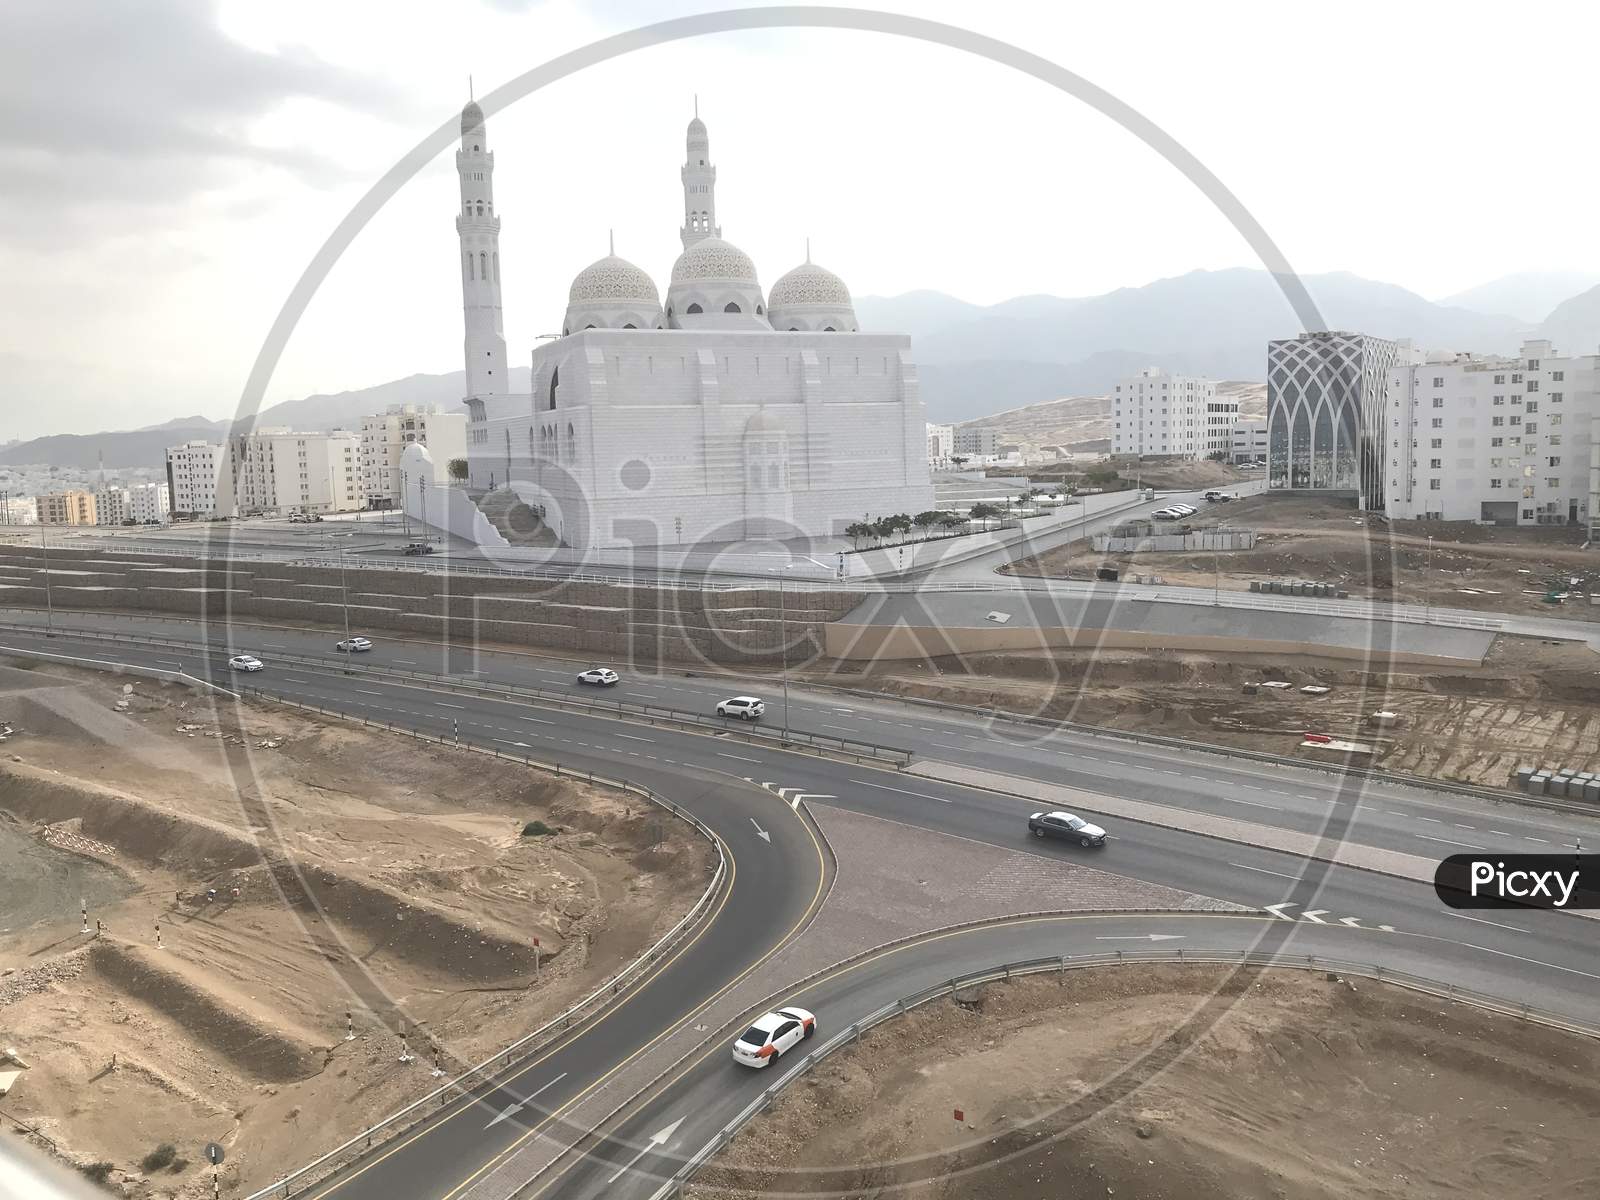 Al Islamic Mosque Picture With The Background Of Muscat City With Cloudy Sky And Such A Beautiful View Of Cityscape